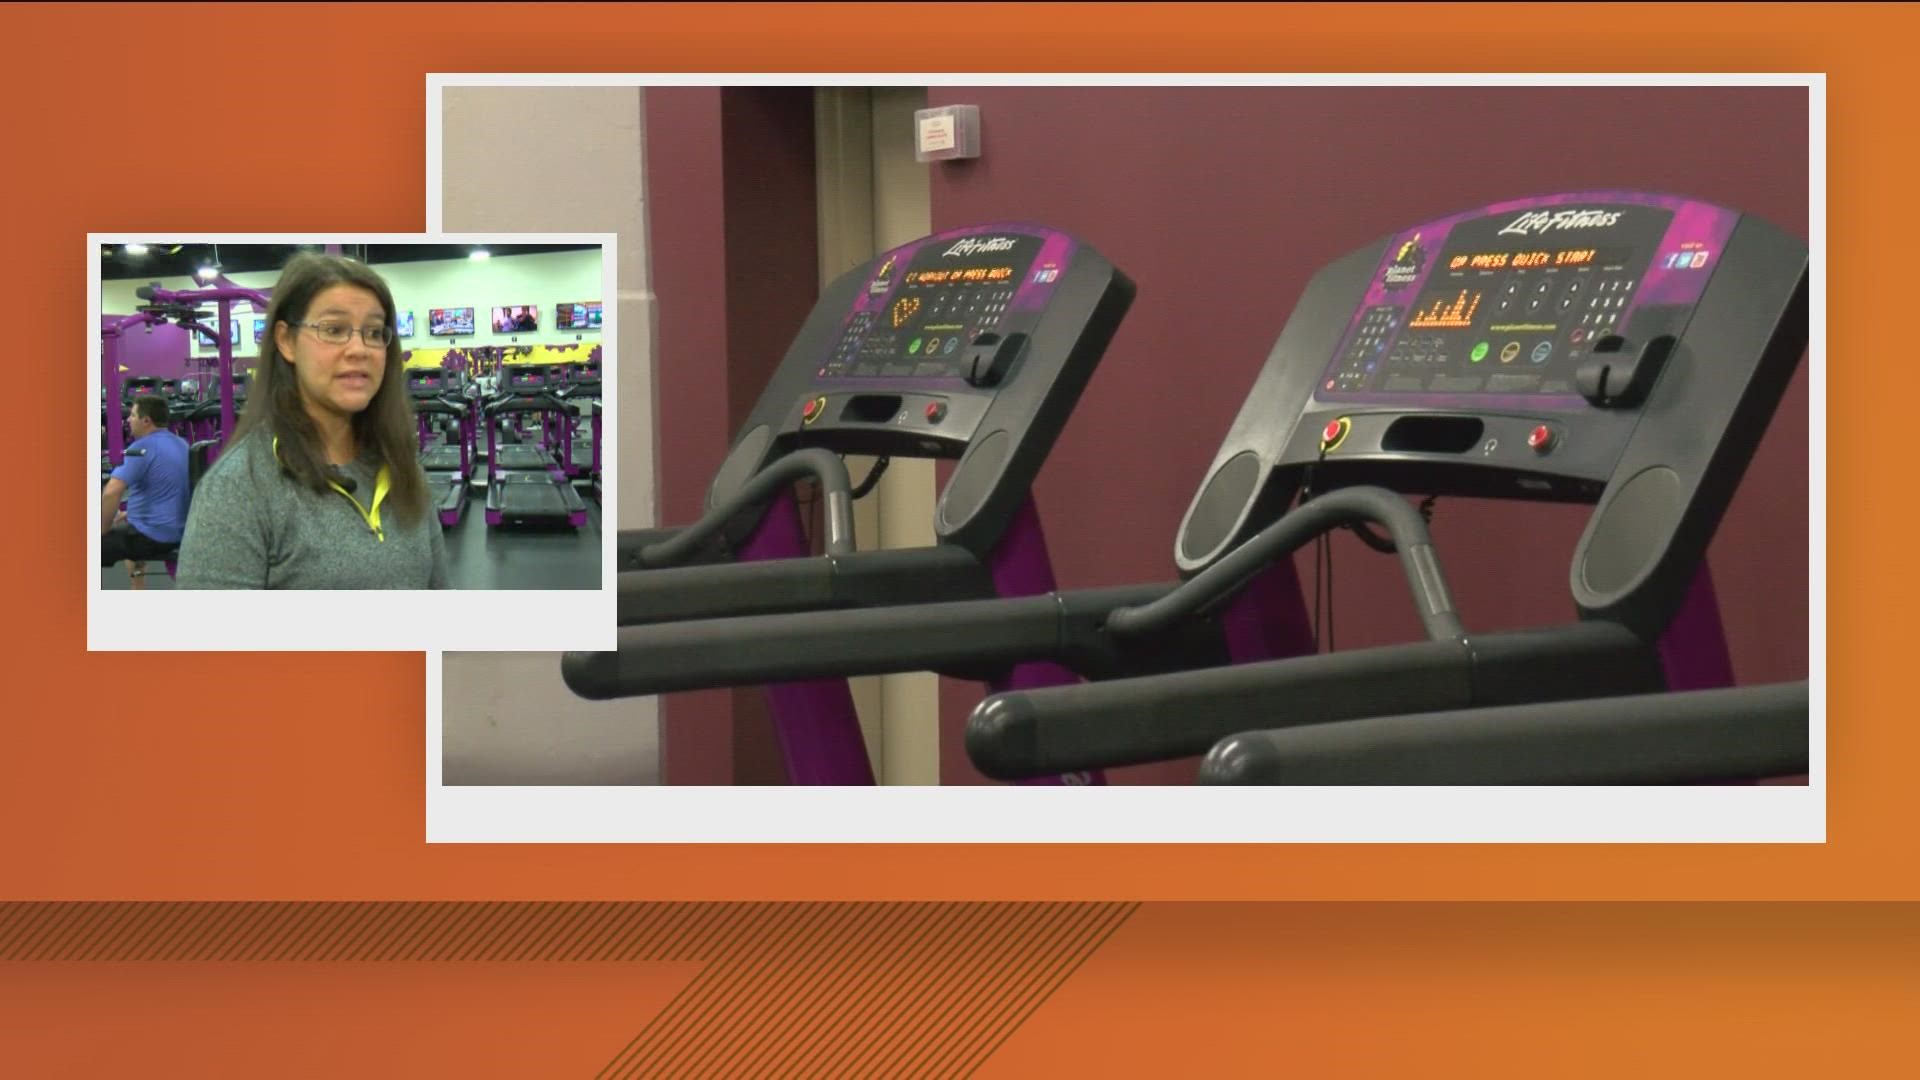 Planet fitness is inviting high school students to workout for free all summer long